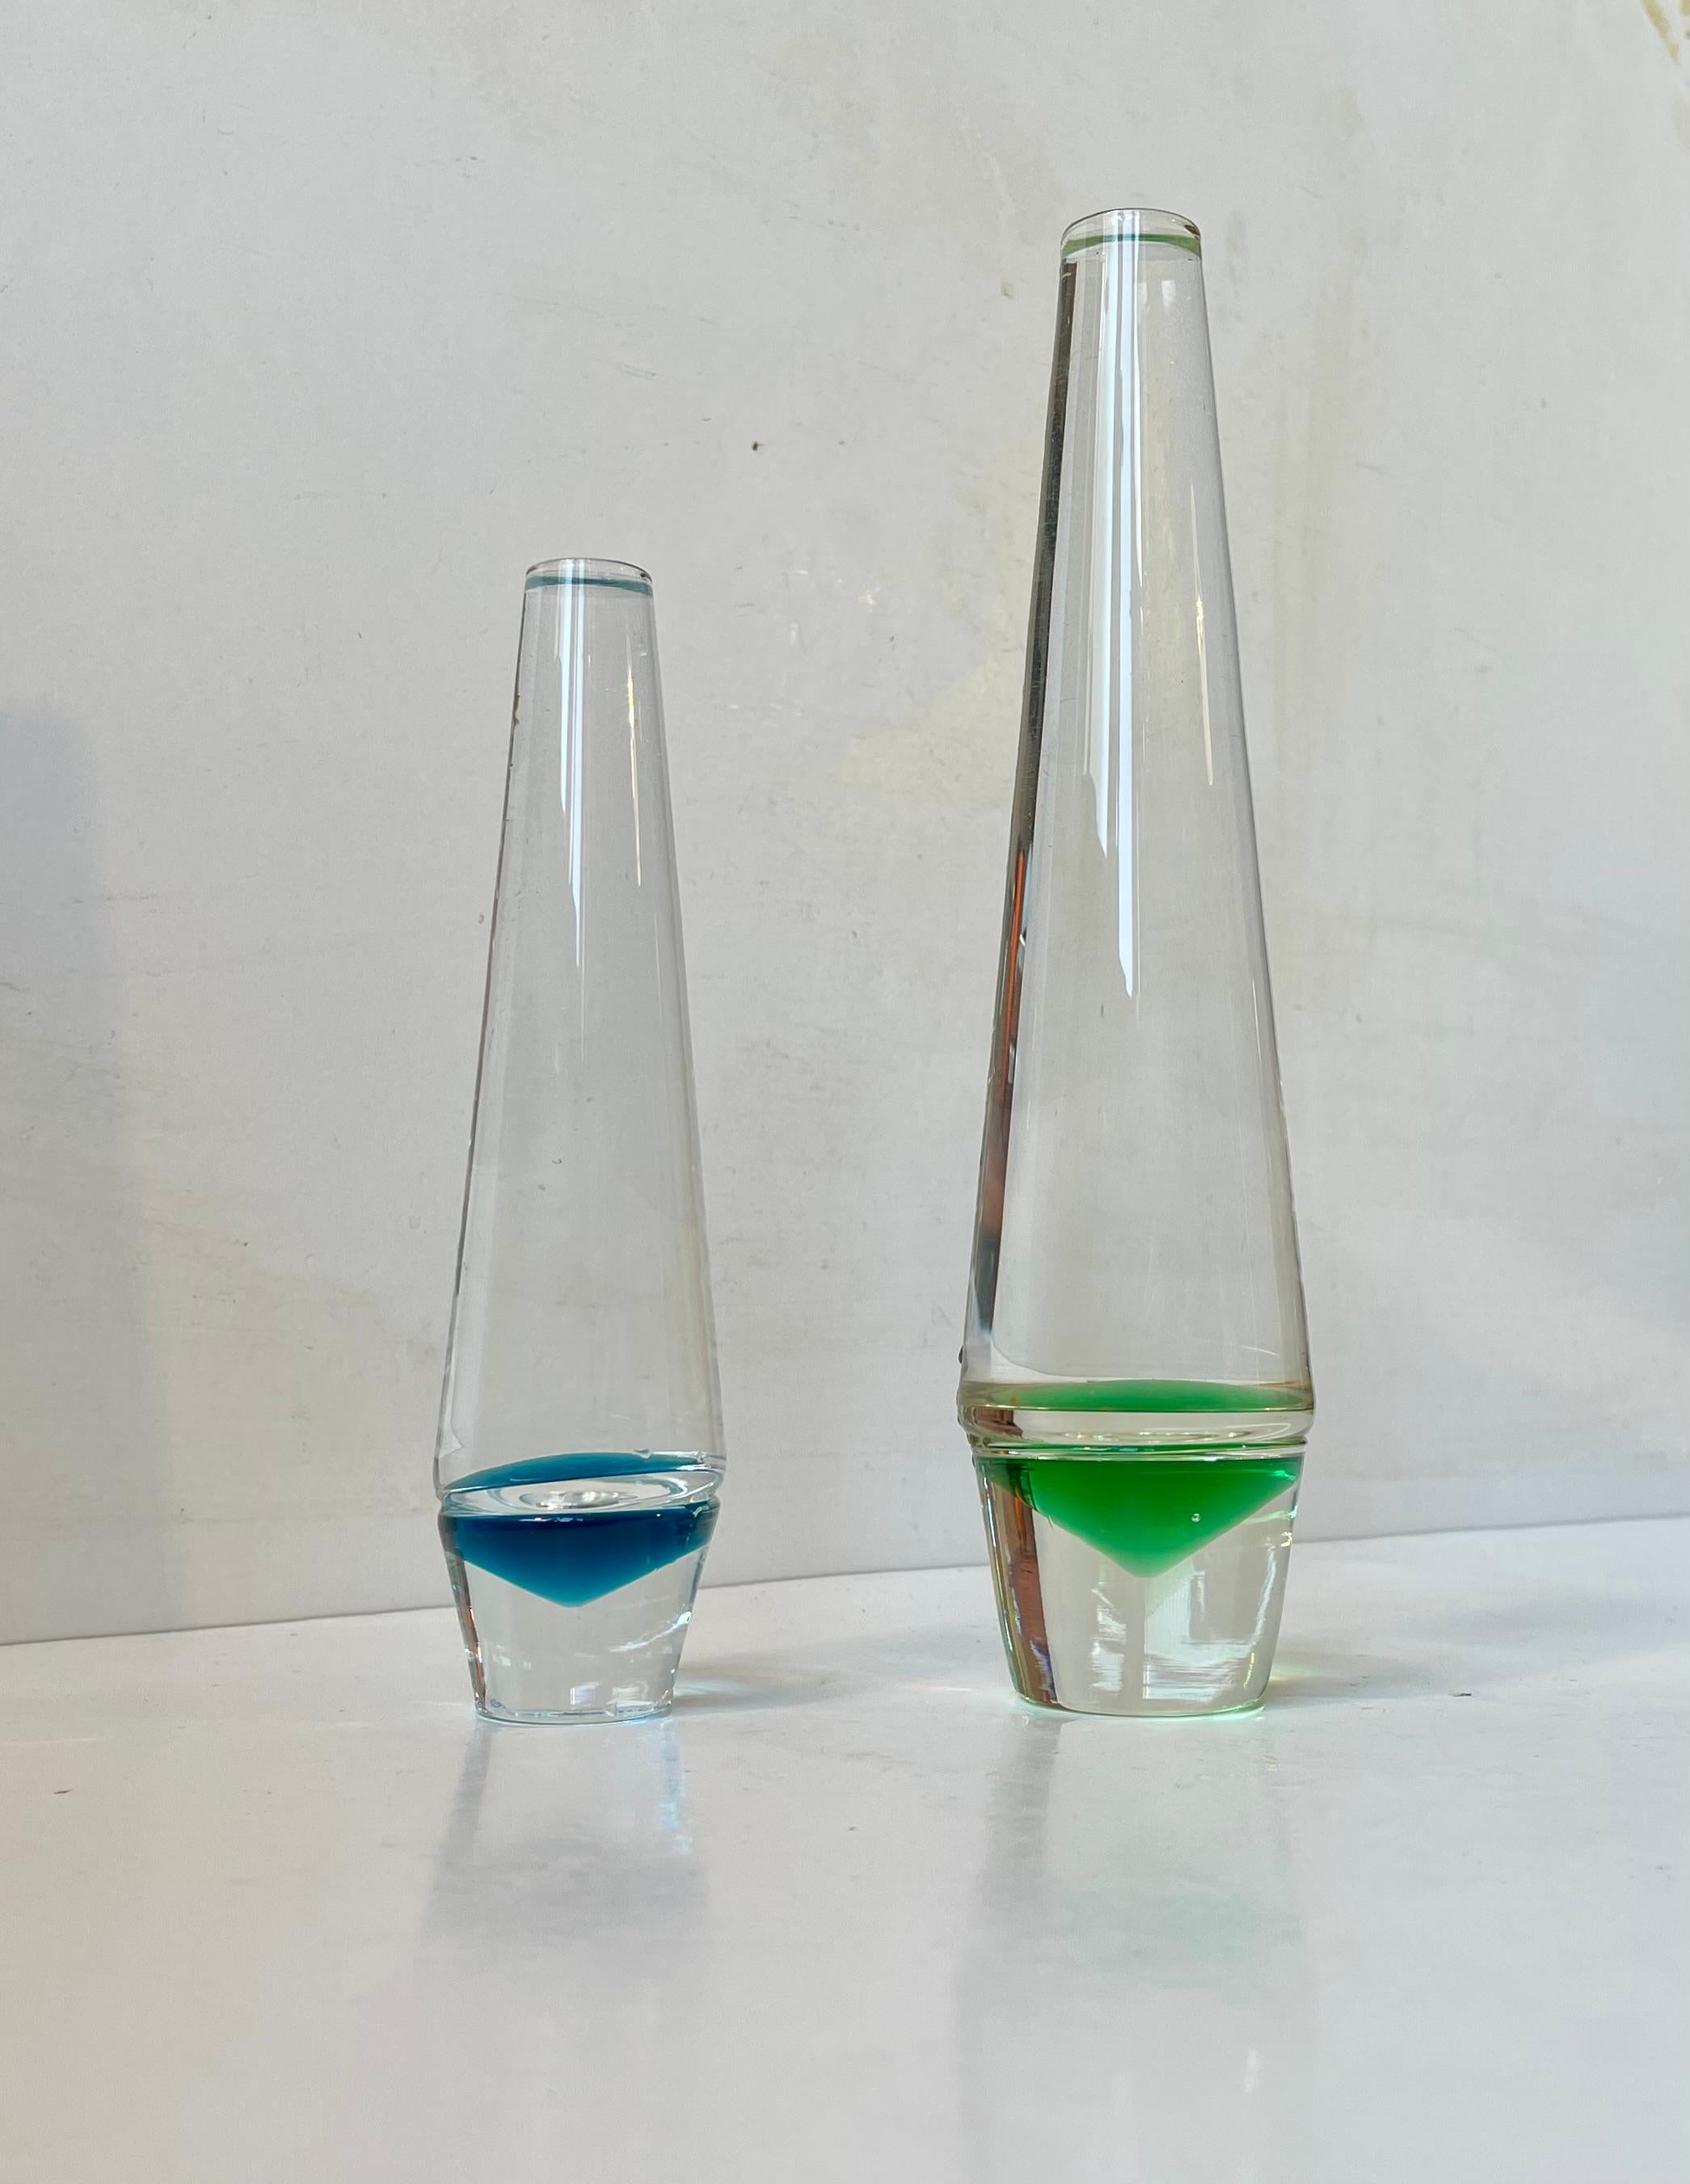 A set of single flower vases - solifleur. Designed by Christer Holmgren in 1965 and made by Holmegaard in Denmark. Reversed pyramid decor in blue and green glass. Measurements: H: 25/18.5 cm. Diameter: 6/4.5 cm. 

The price is for the set of